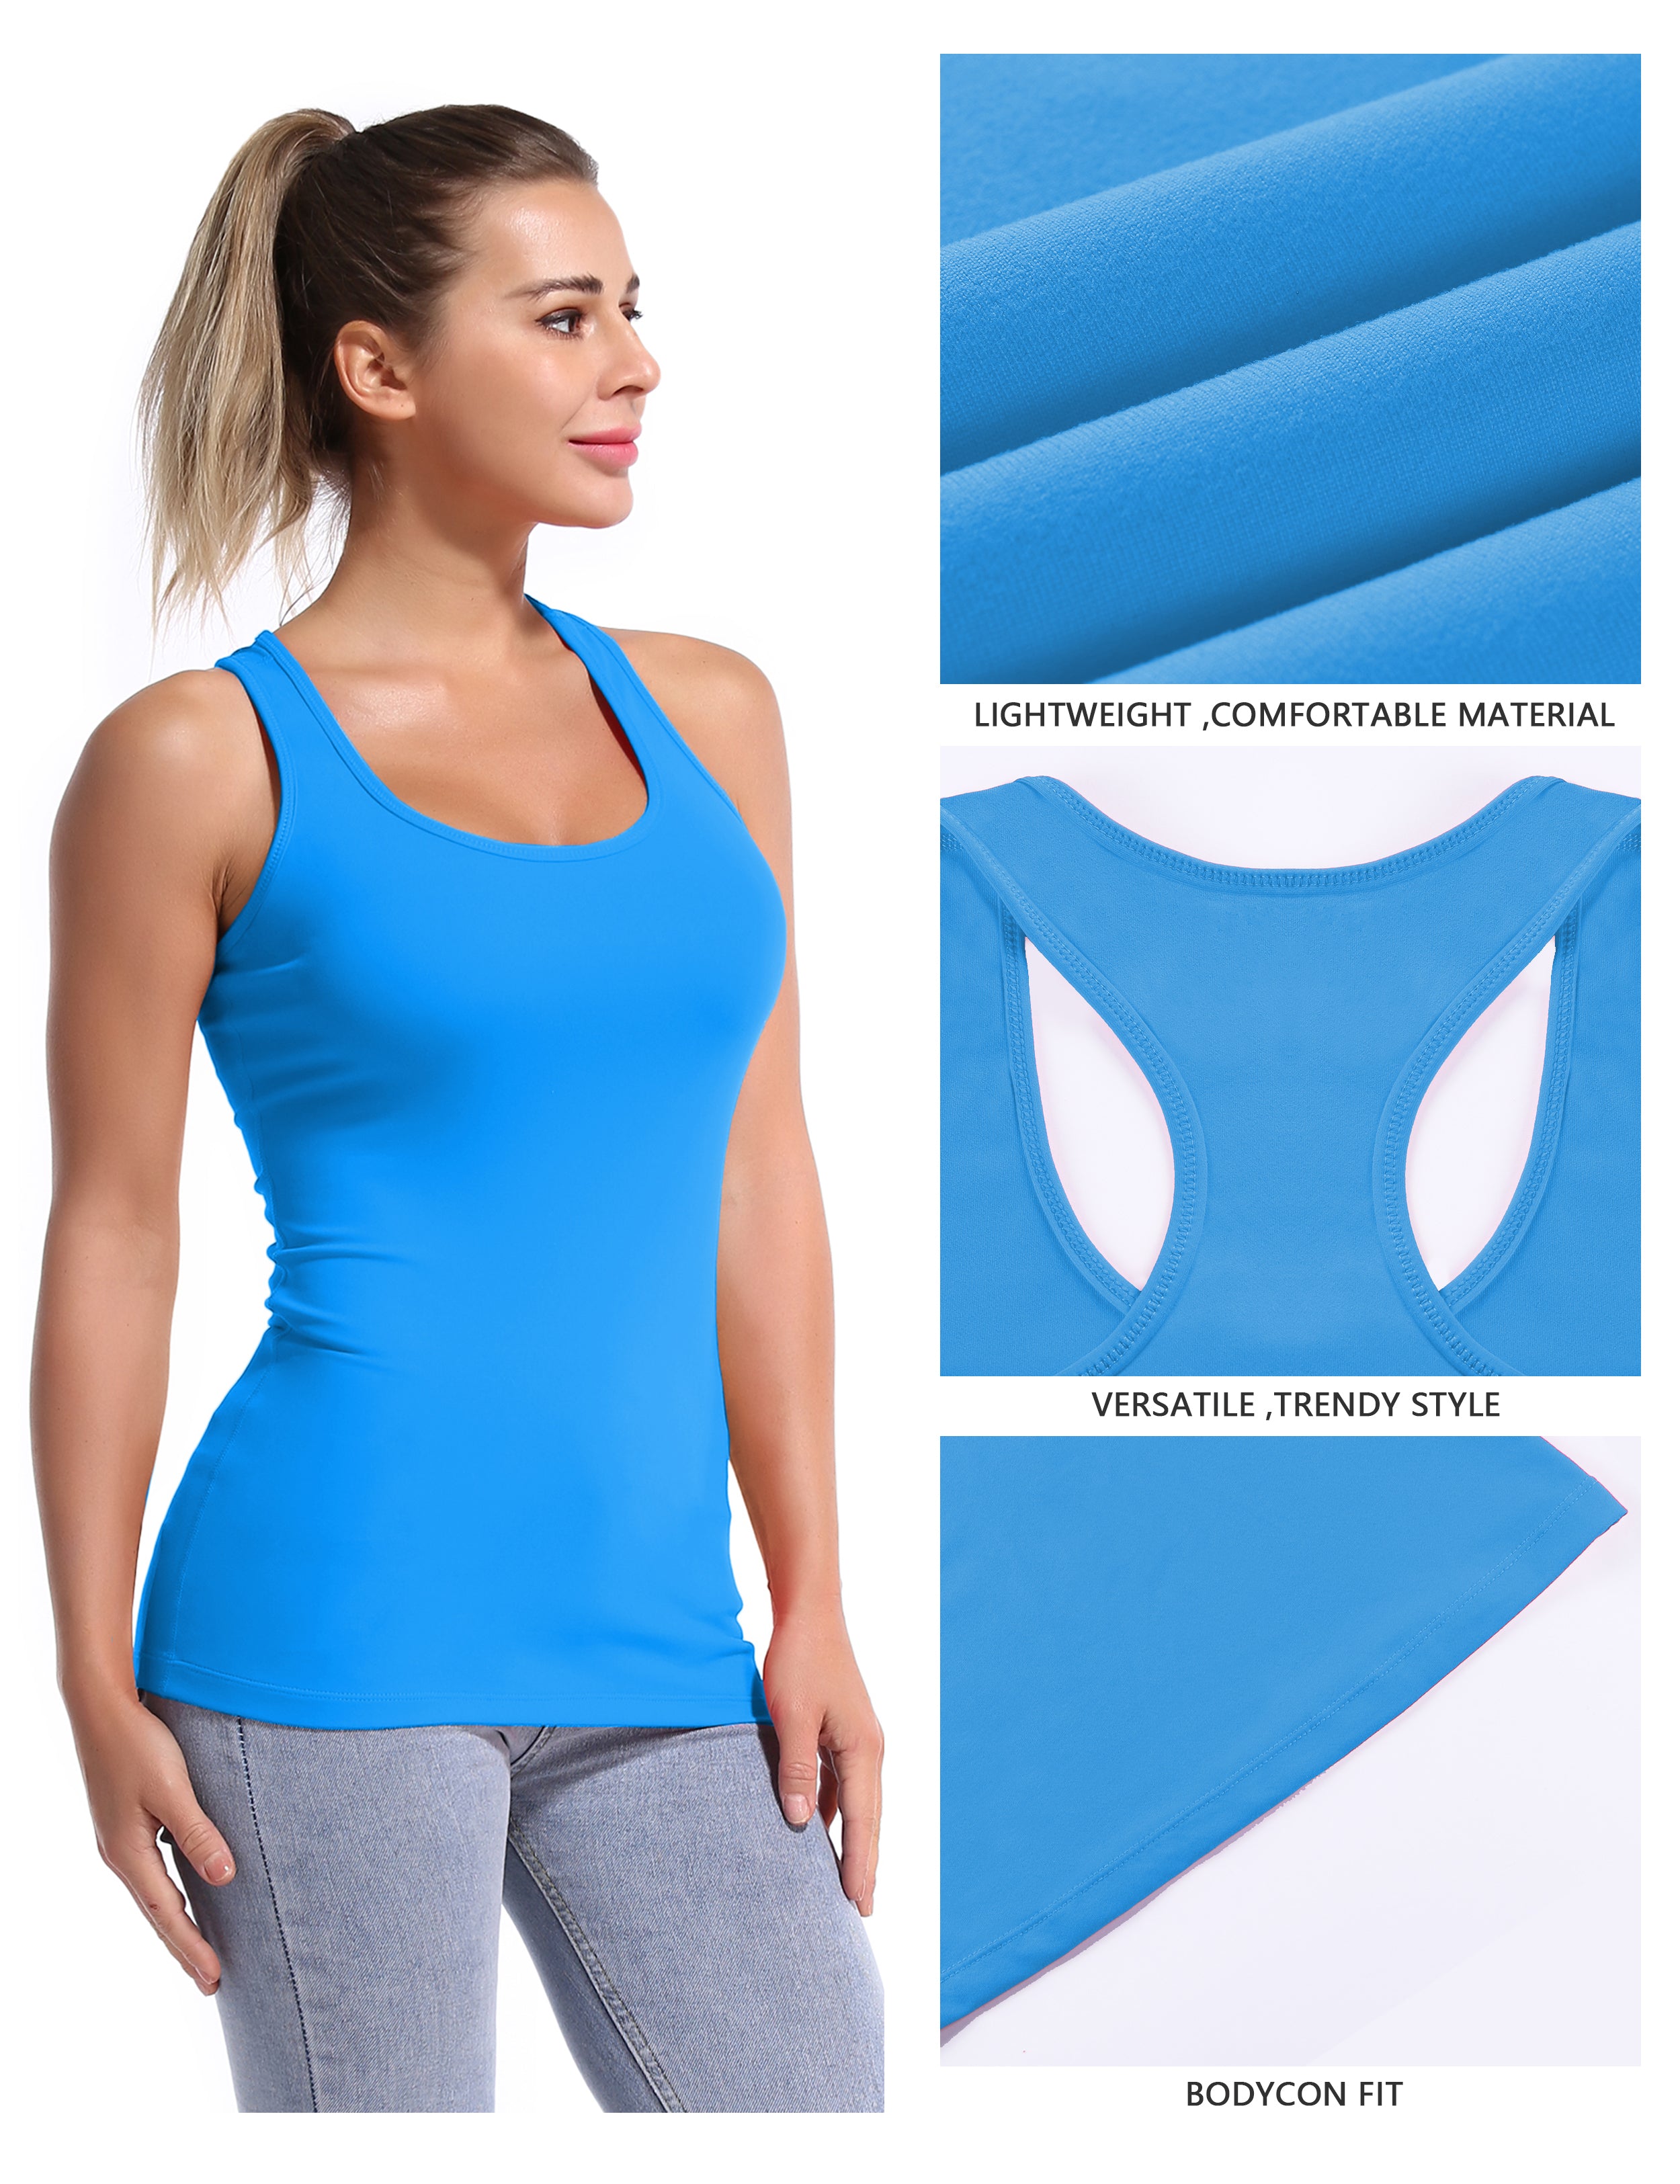 Racerback Athletic Tank Tops electricblue 92%Nylon/8%Spandex(Cotton Soft) Designed for Golf Tight Fit So buttery soft, it feels weightless Sweat-wicking Four-way stretch Breathable Contours your body Sits below the waistband for moderate, everyday coverage